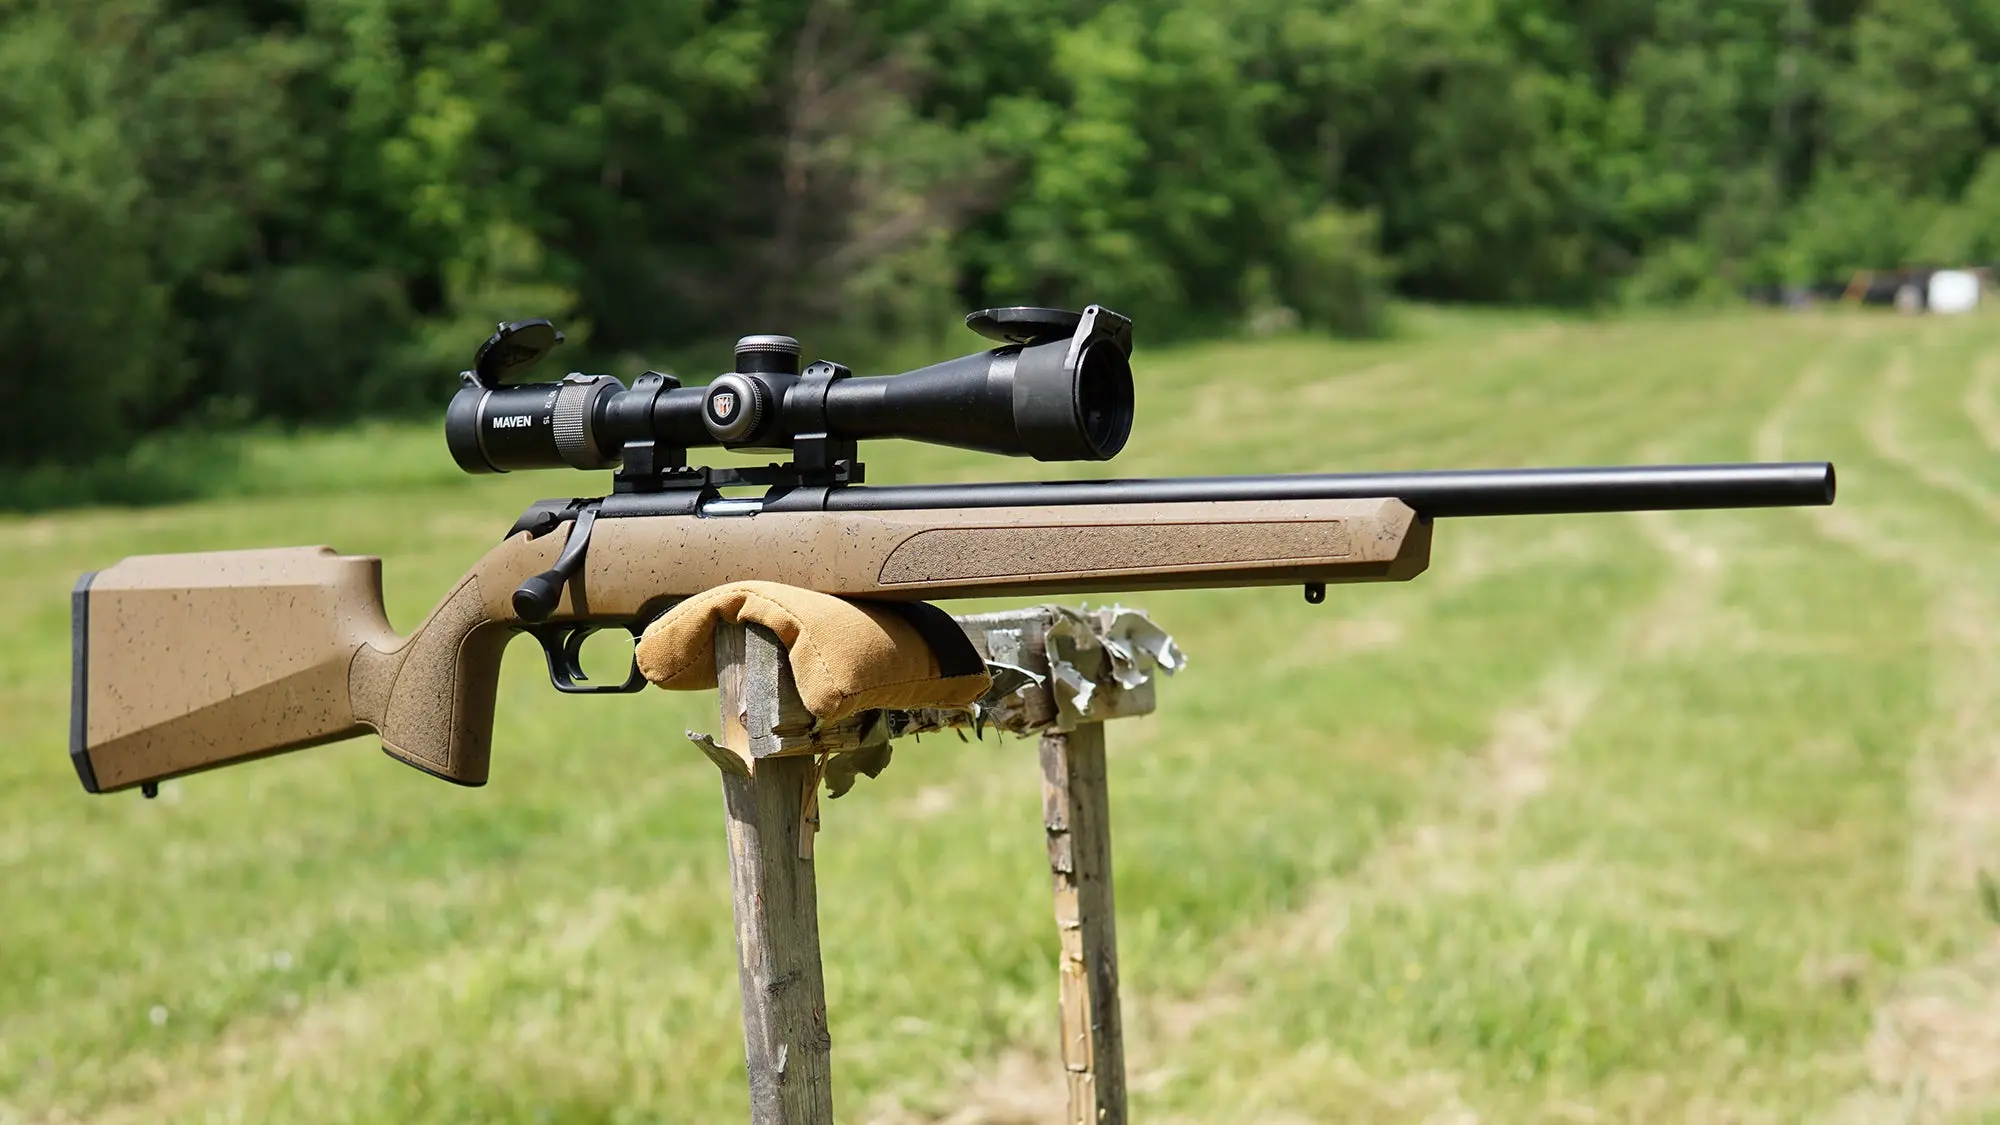 Springfield Model 2020 Rimfire rifle resting on a target stand at a rifle range.